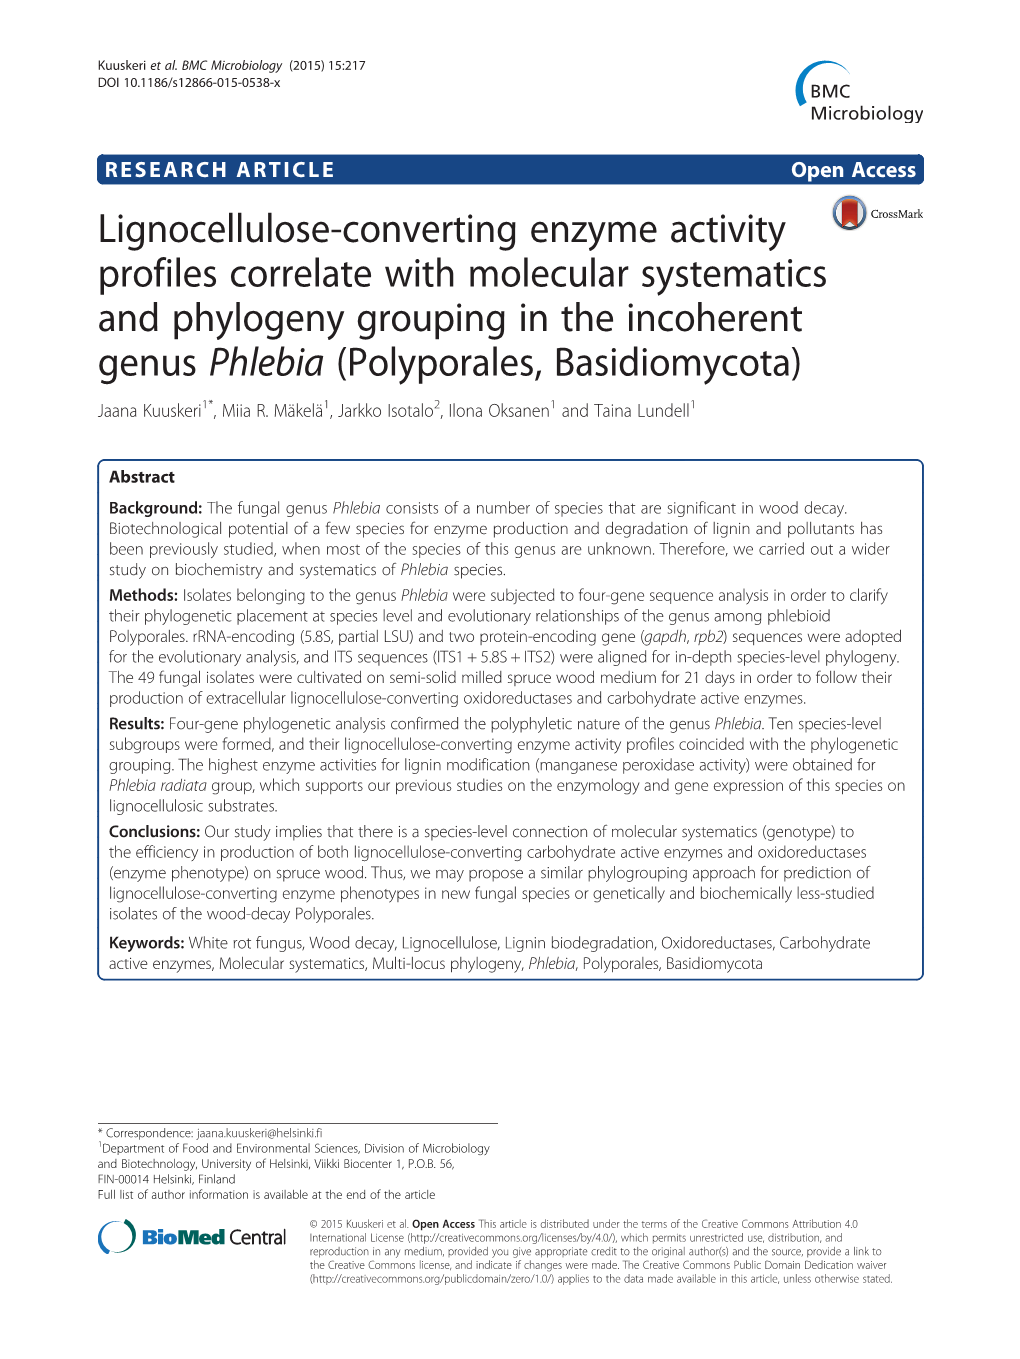 Lignocellulose-Converting Enzyme Activity Profiles Correlate With